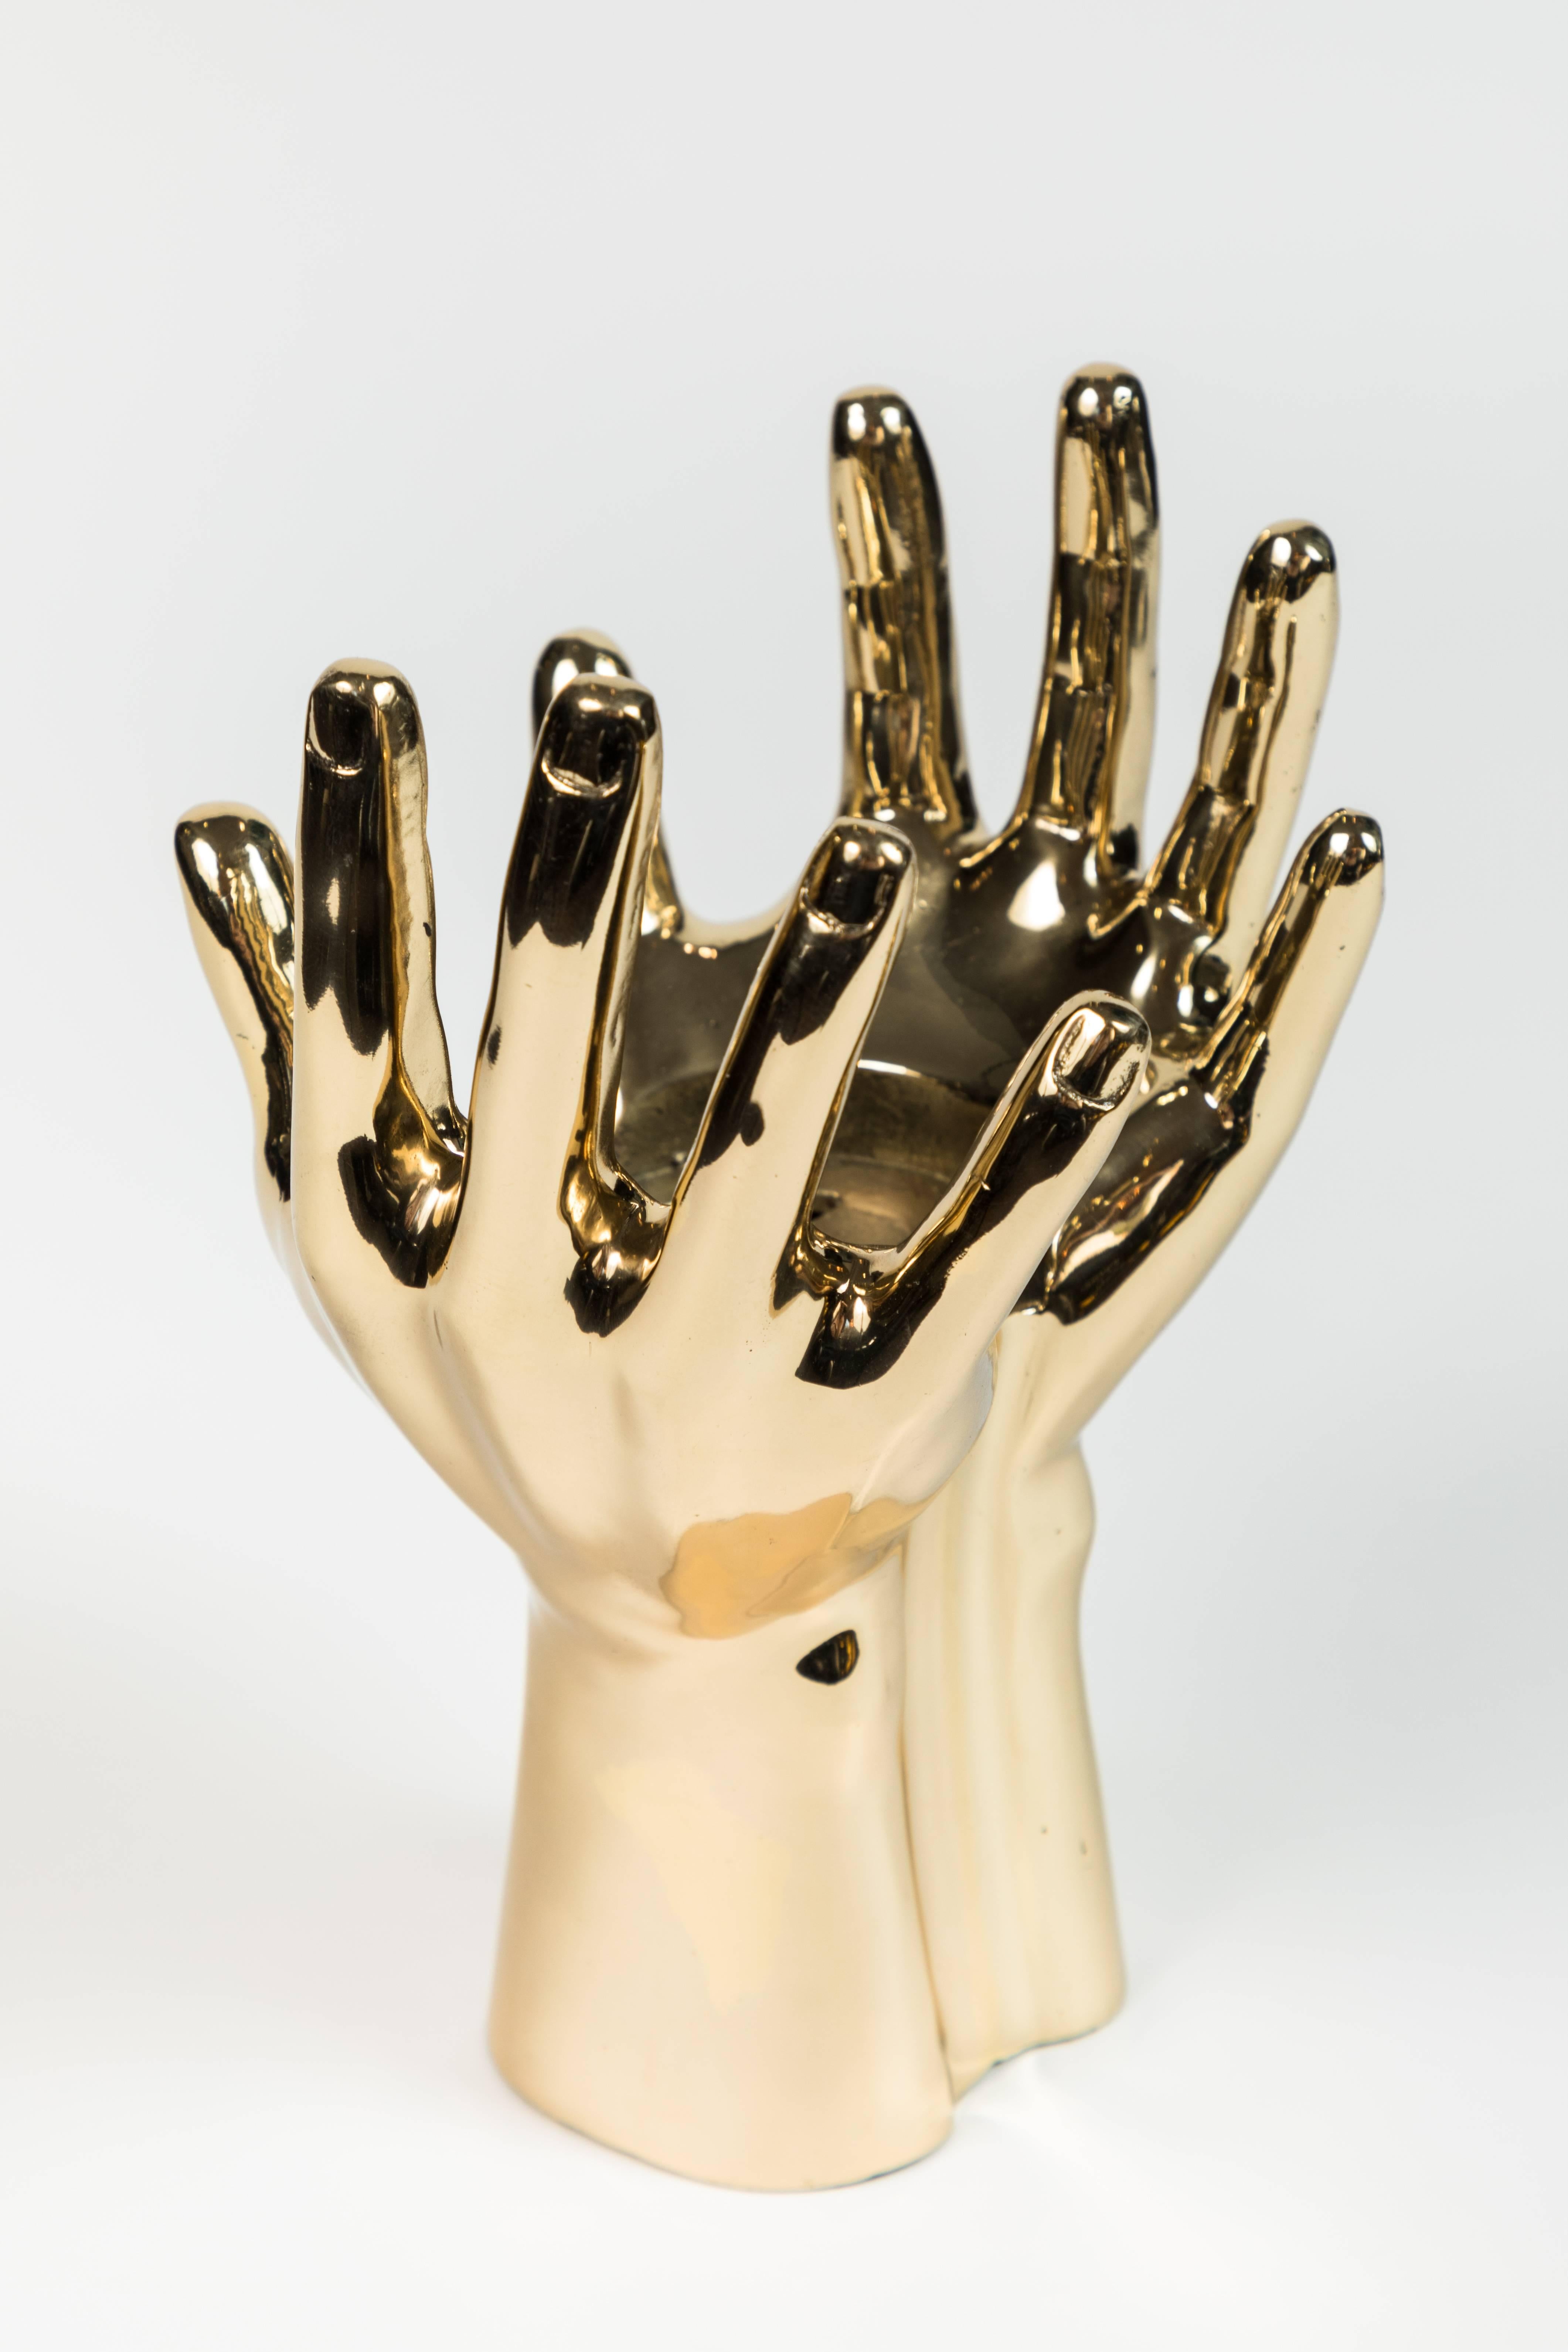 Sculptural brass hand in polished brass. French, 1970s. Hand has been drilled as this was previously a lamp. It could definitely be rewired and used as a lamp, but we like it as a purely decorative object.